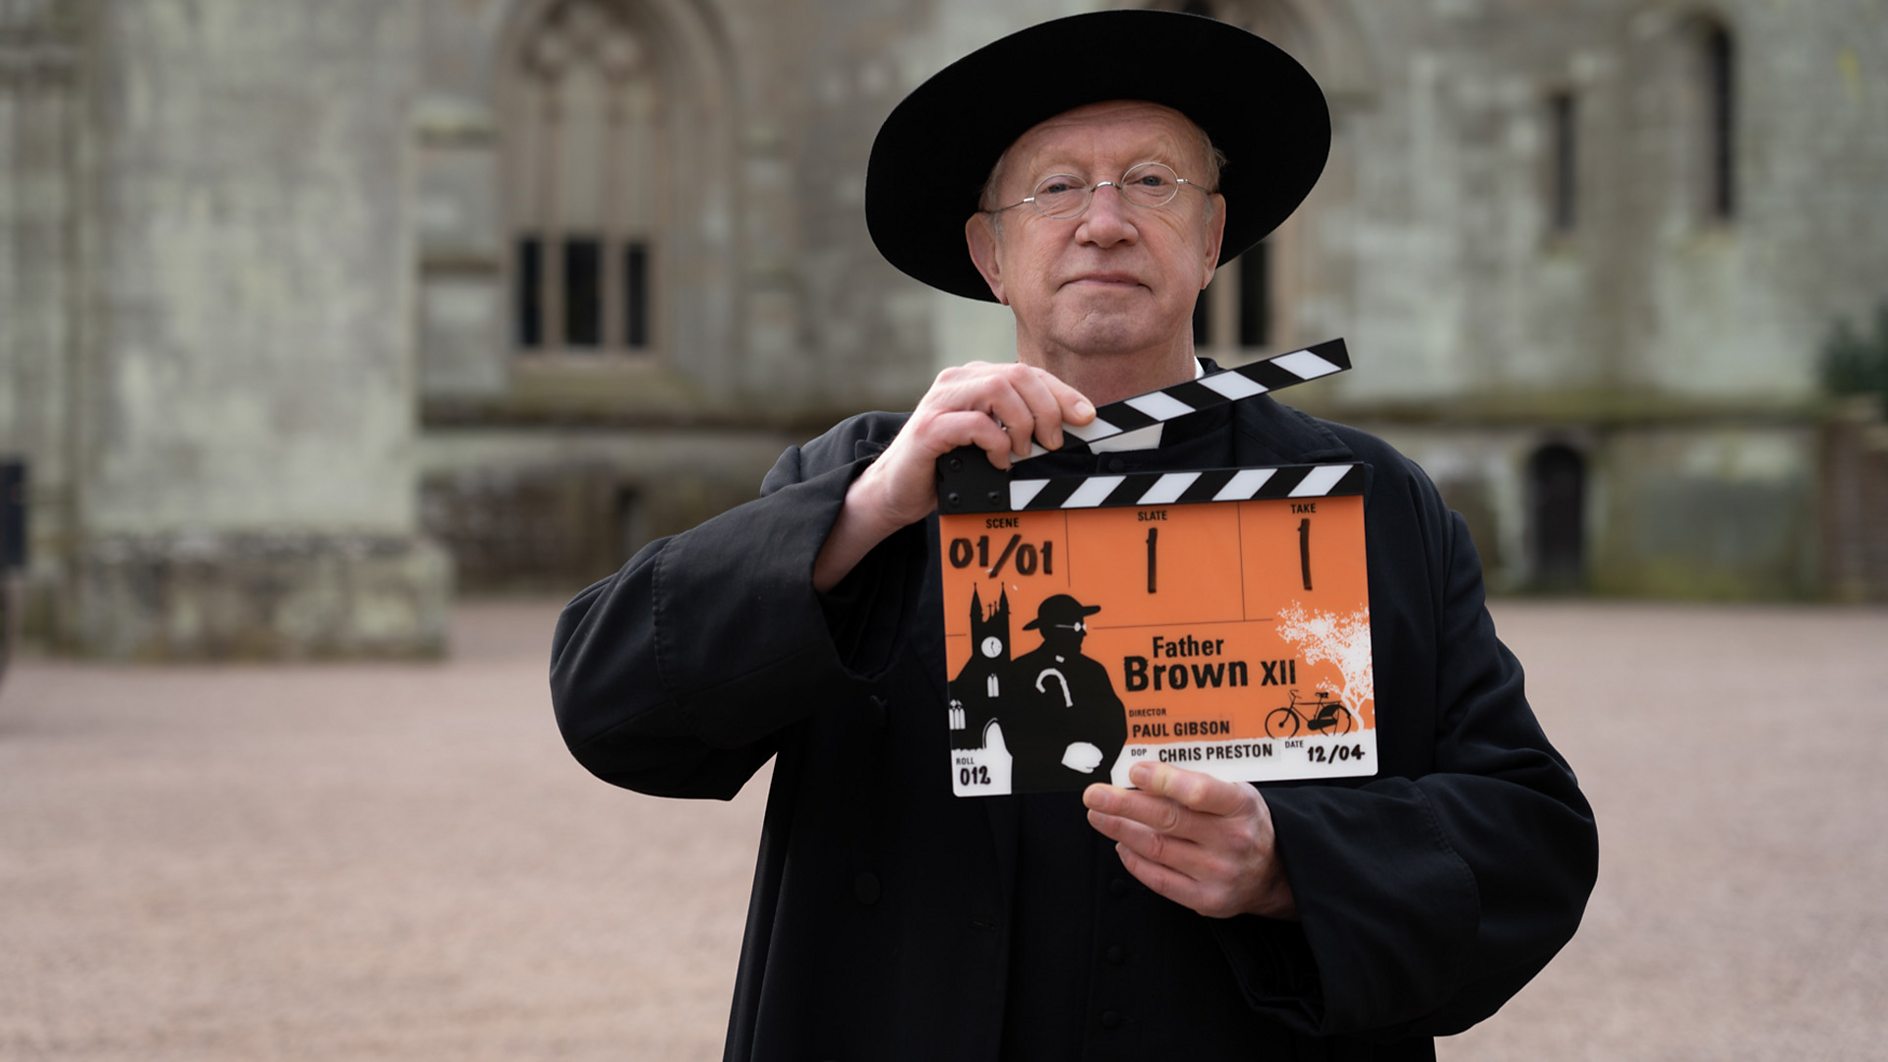 Father Brown is back! Filming has begun on series 12 of the internationally successful drama